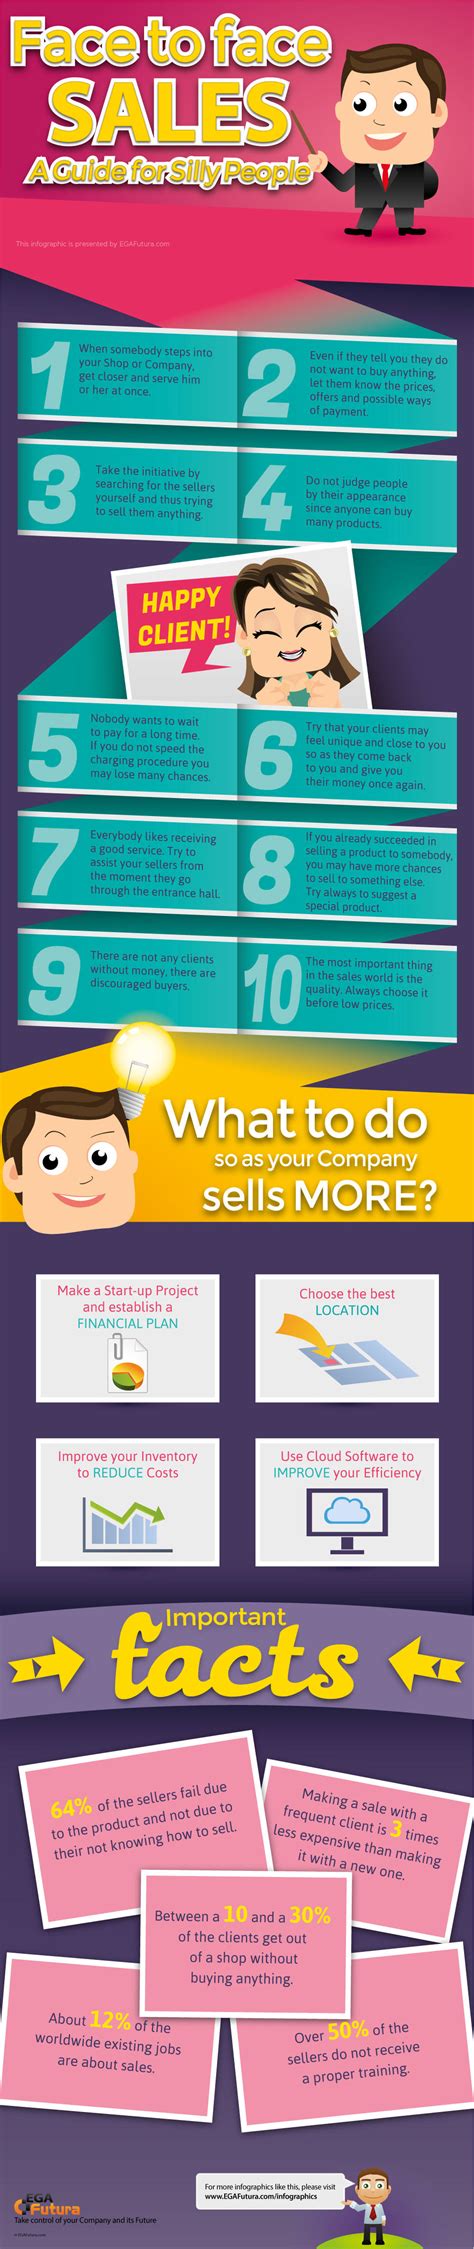 Infographic Face To Face Sales A Guide For Silly People Ega Futura